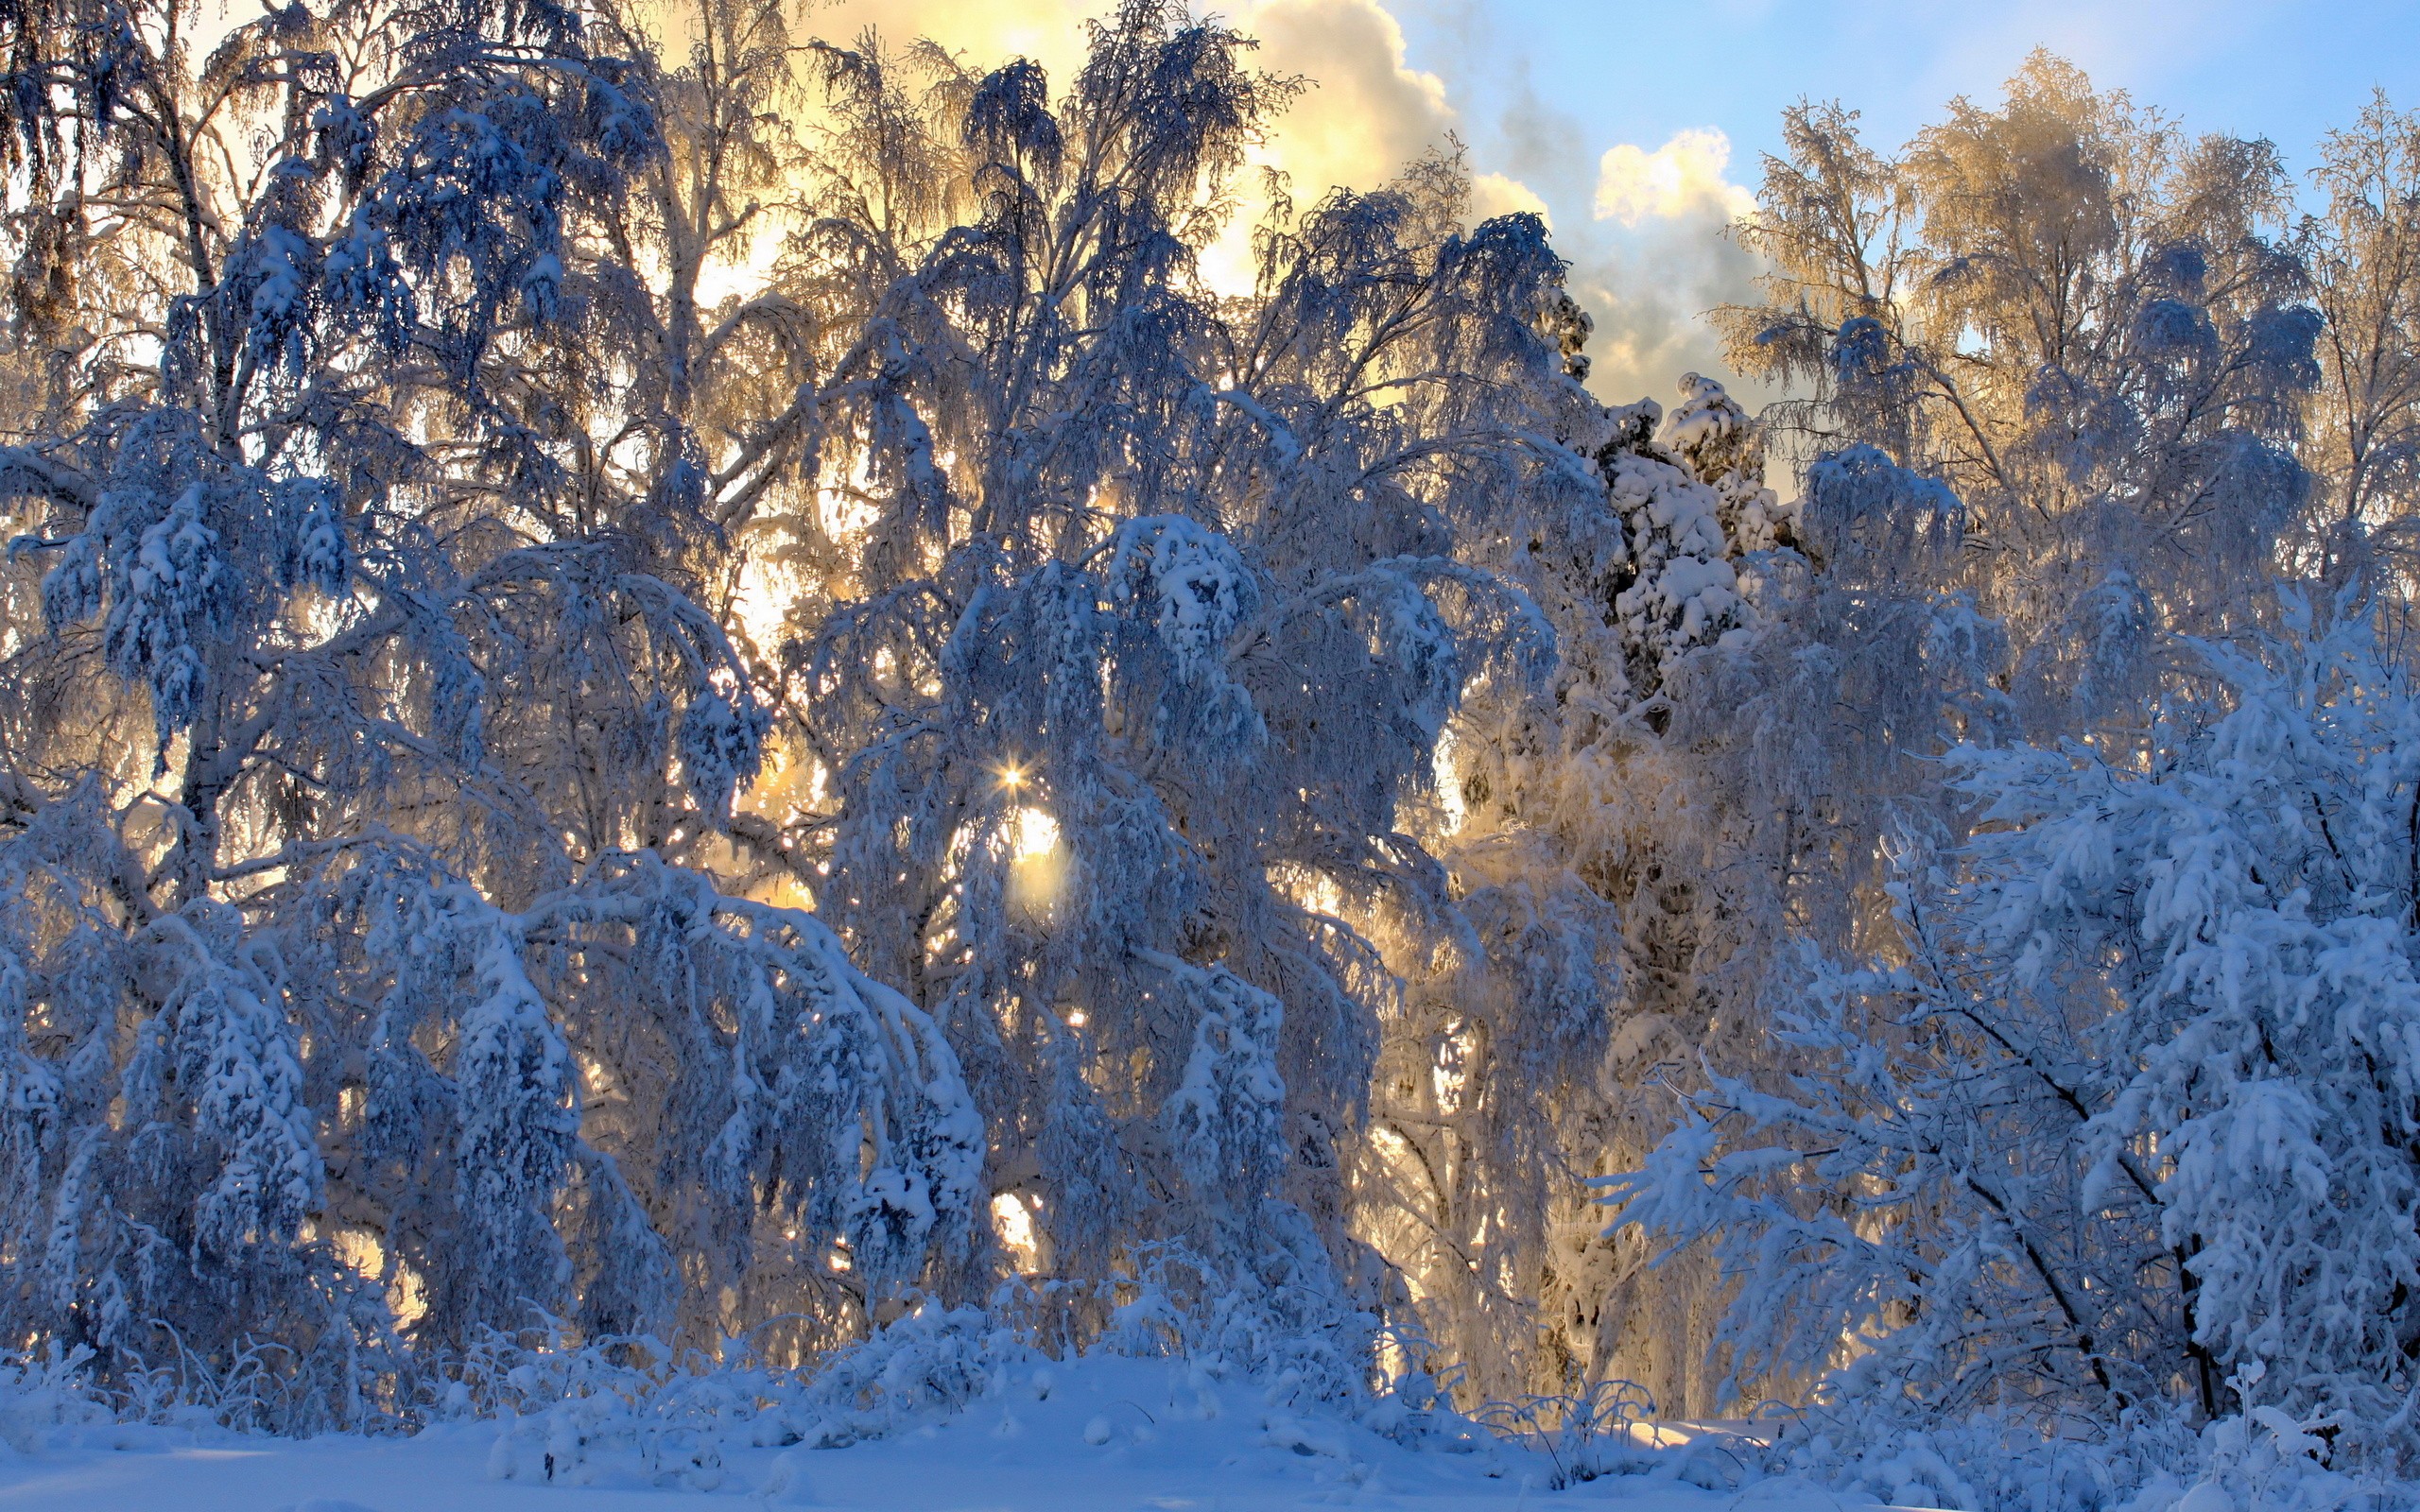 General 2560x1600 winter snow trees frost dappled sunlight plants cold ice sunlight outdoors